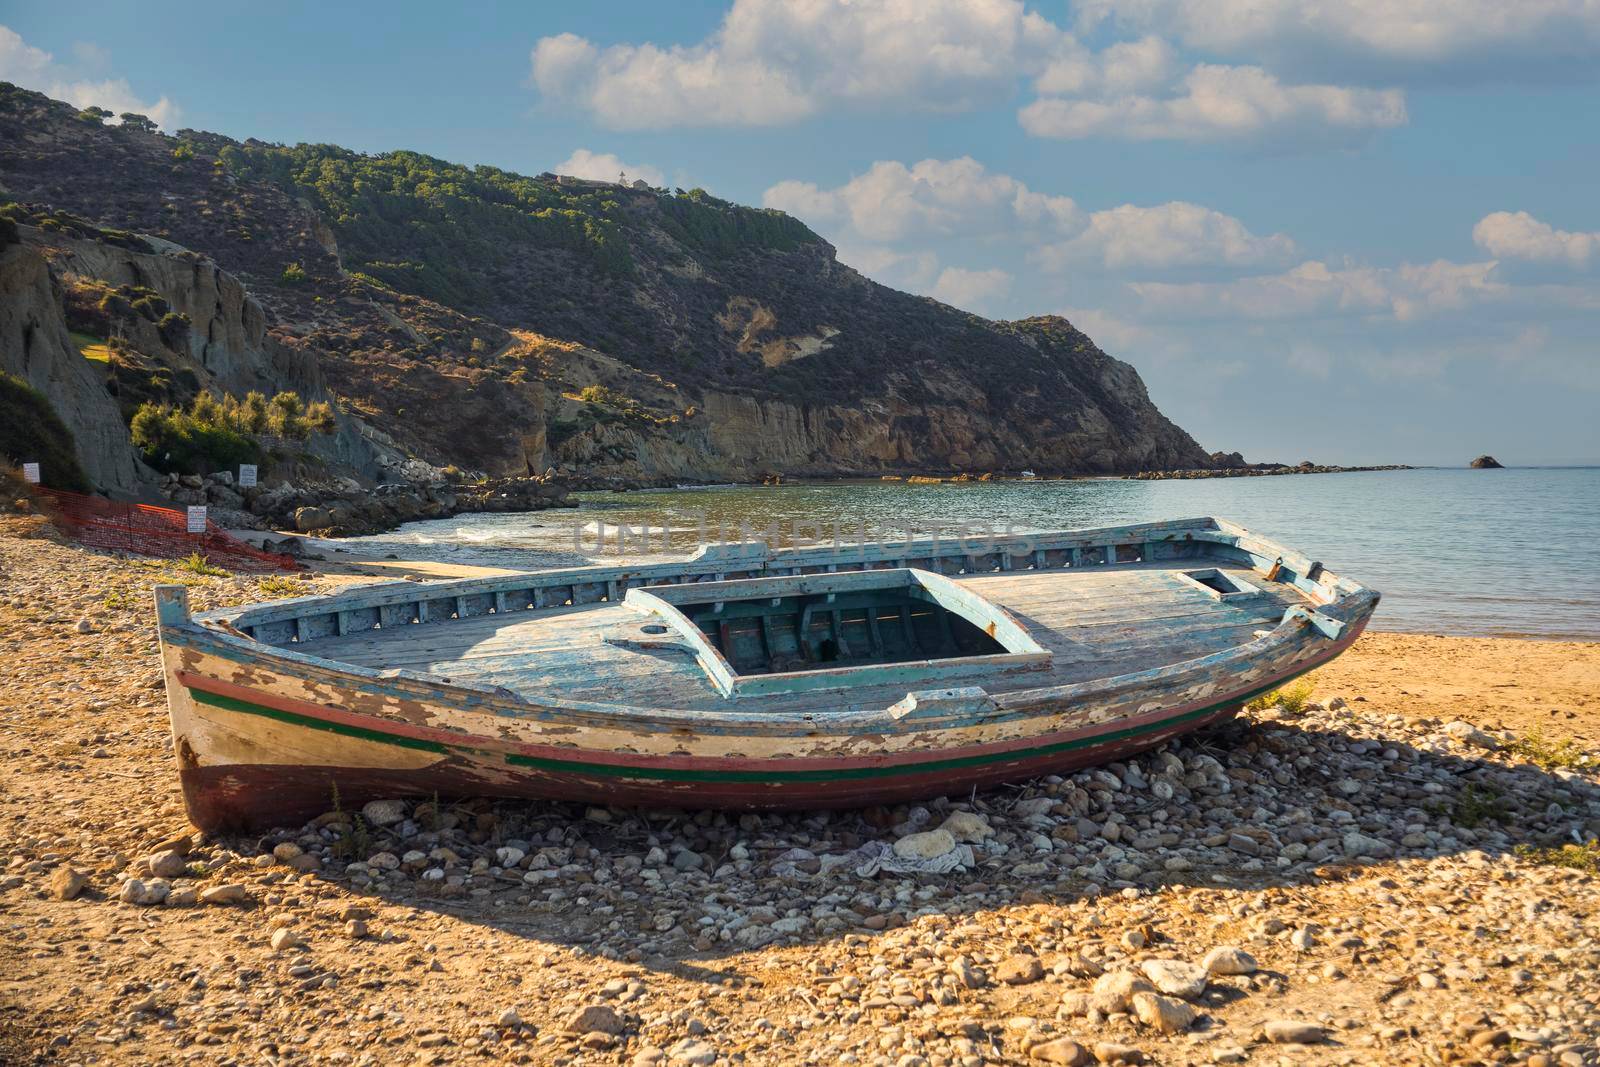 Broken migrant boat stranded on the beach by bepsimage